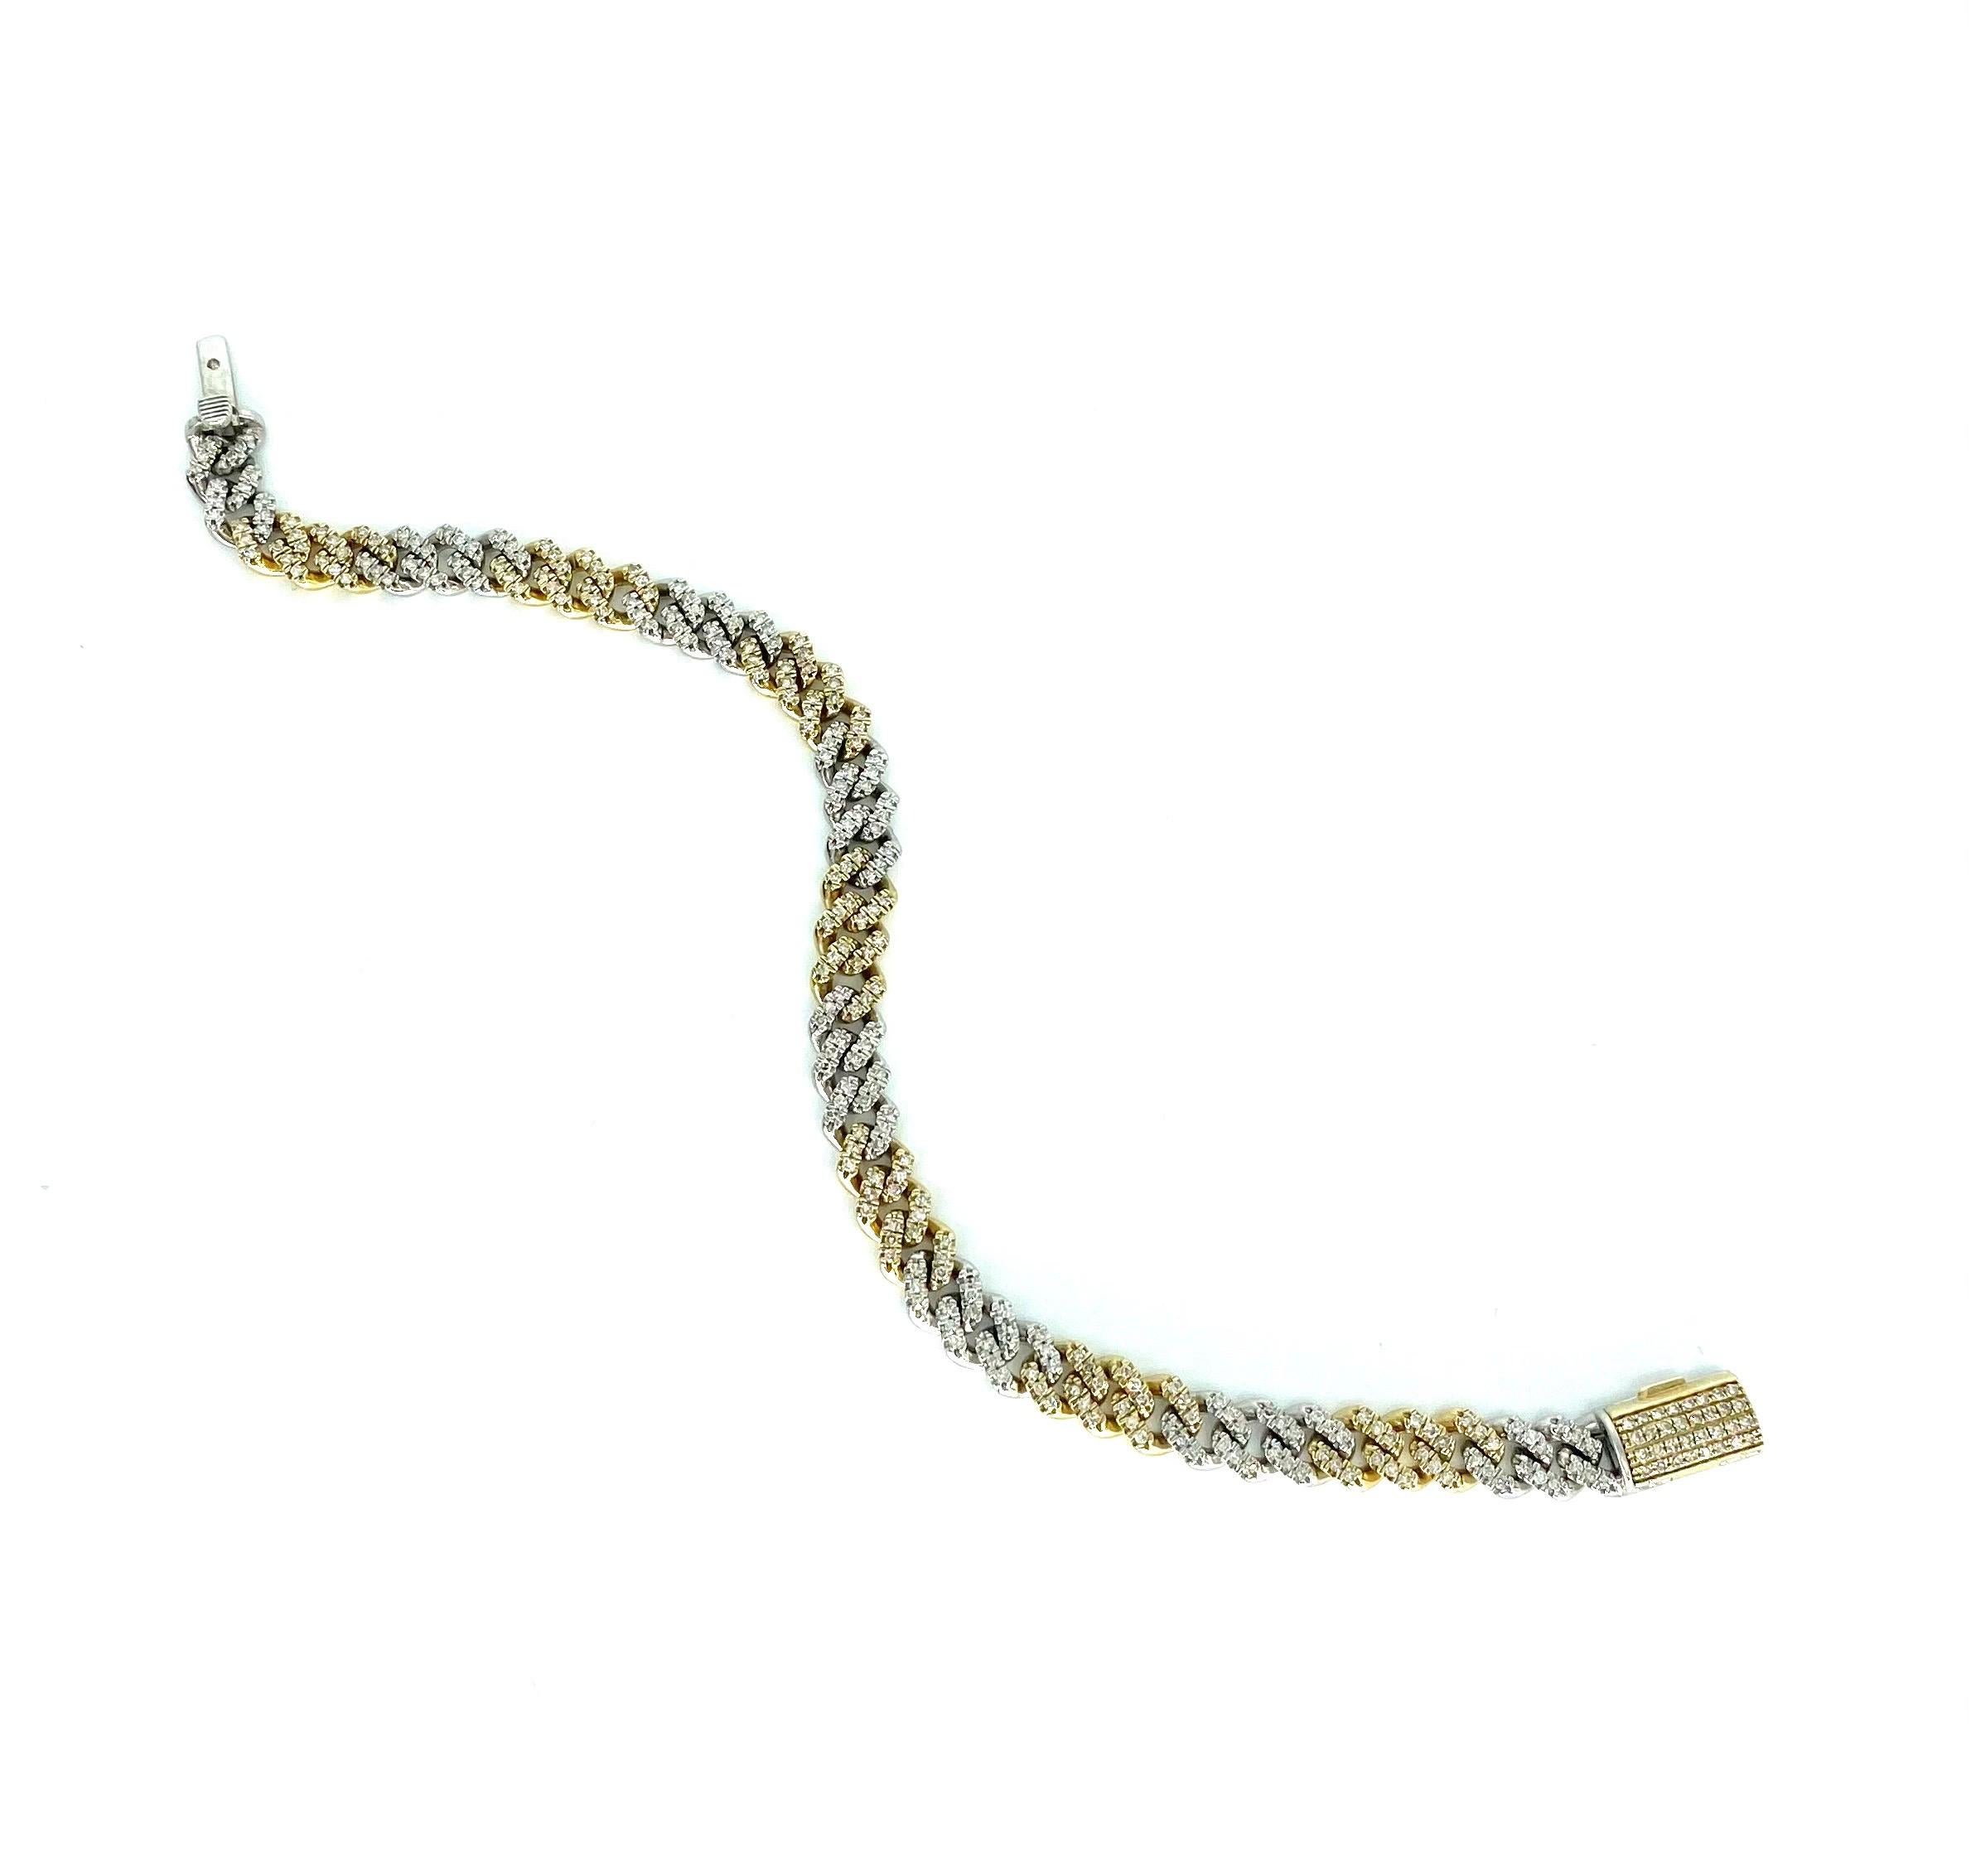 4.44 Carat Two-Tone Diamond Cuban Link Bracelet 7.75mm
Very high quality design with approx 296 natural diamonds F/G VS/SI clarity very sparkly shining very elegantly. The total diamonds weights total approx 4.44 carats diamonds. Modern box lock to